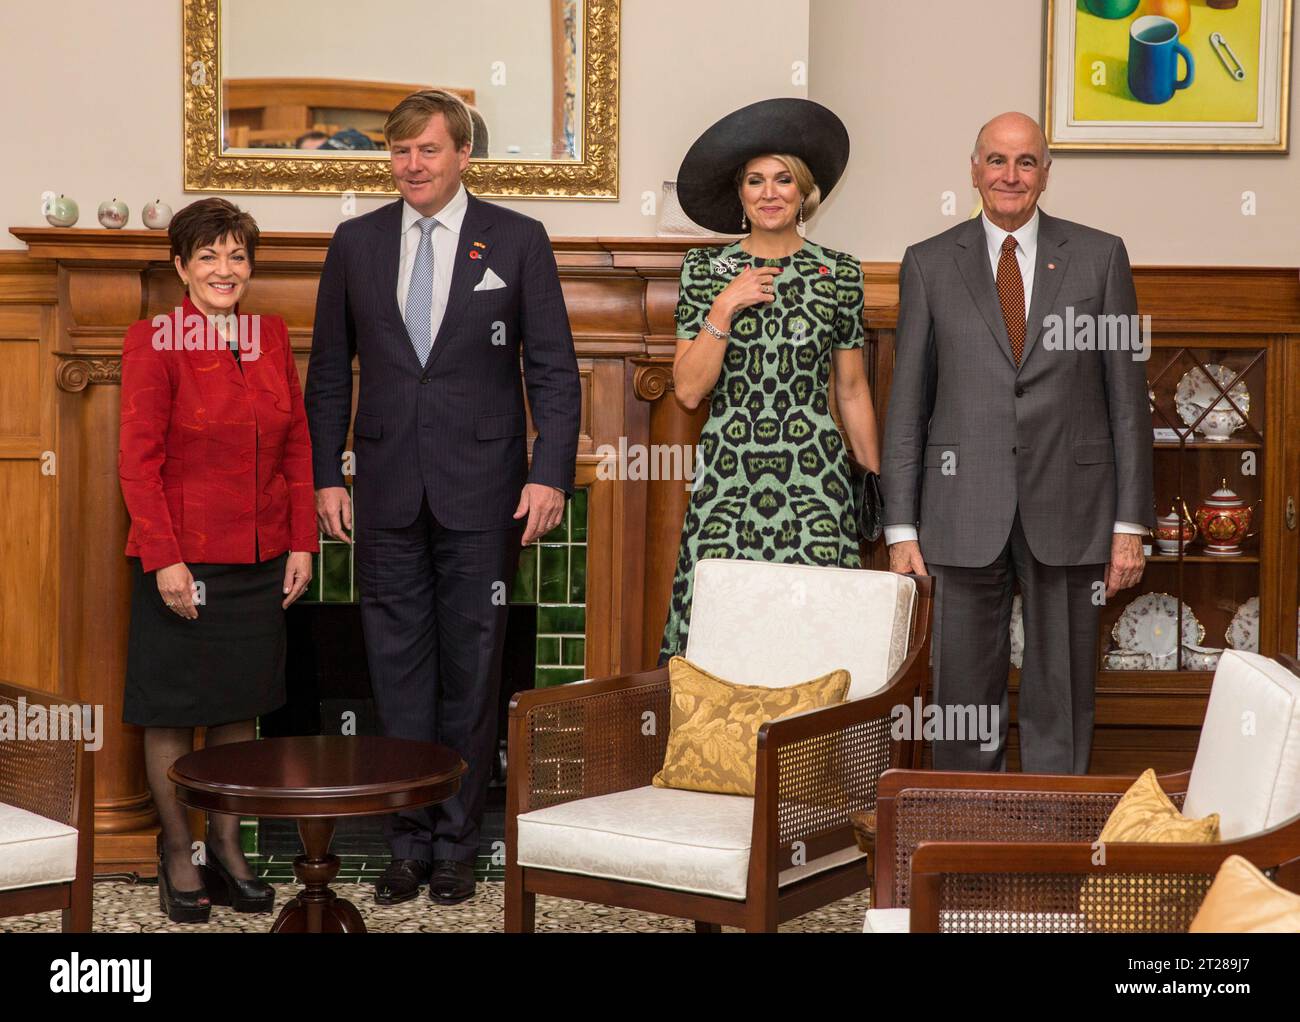 Dame Patsy Reddy, Governor General, left, King Willem-Alexander and Queen Maxima of the Netherlands, with the Governor General's husband, Sir David Gascoigne at the official welcome ceremony at Government House, Wellington, New Zealand Stock Photo